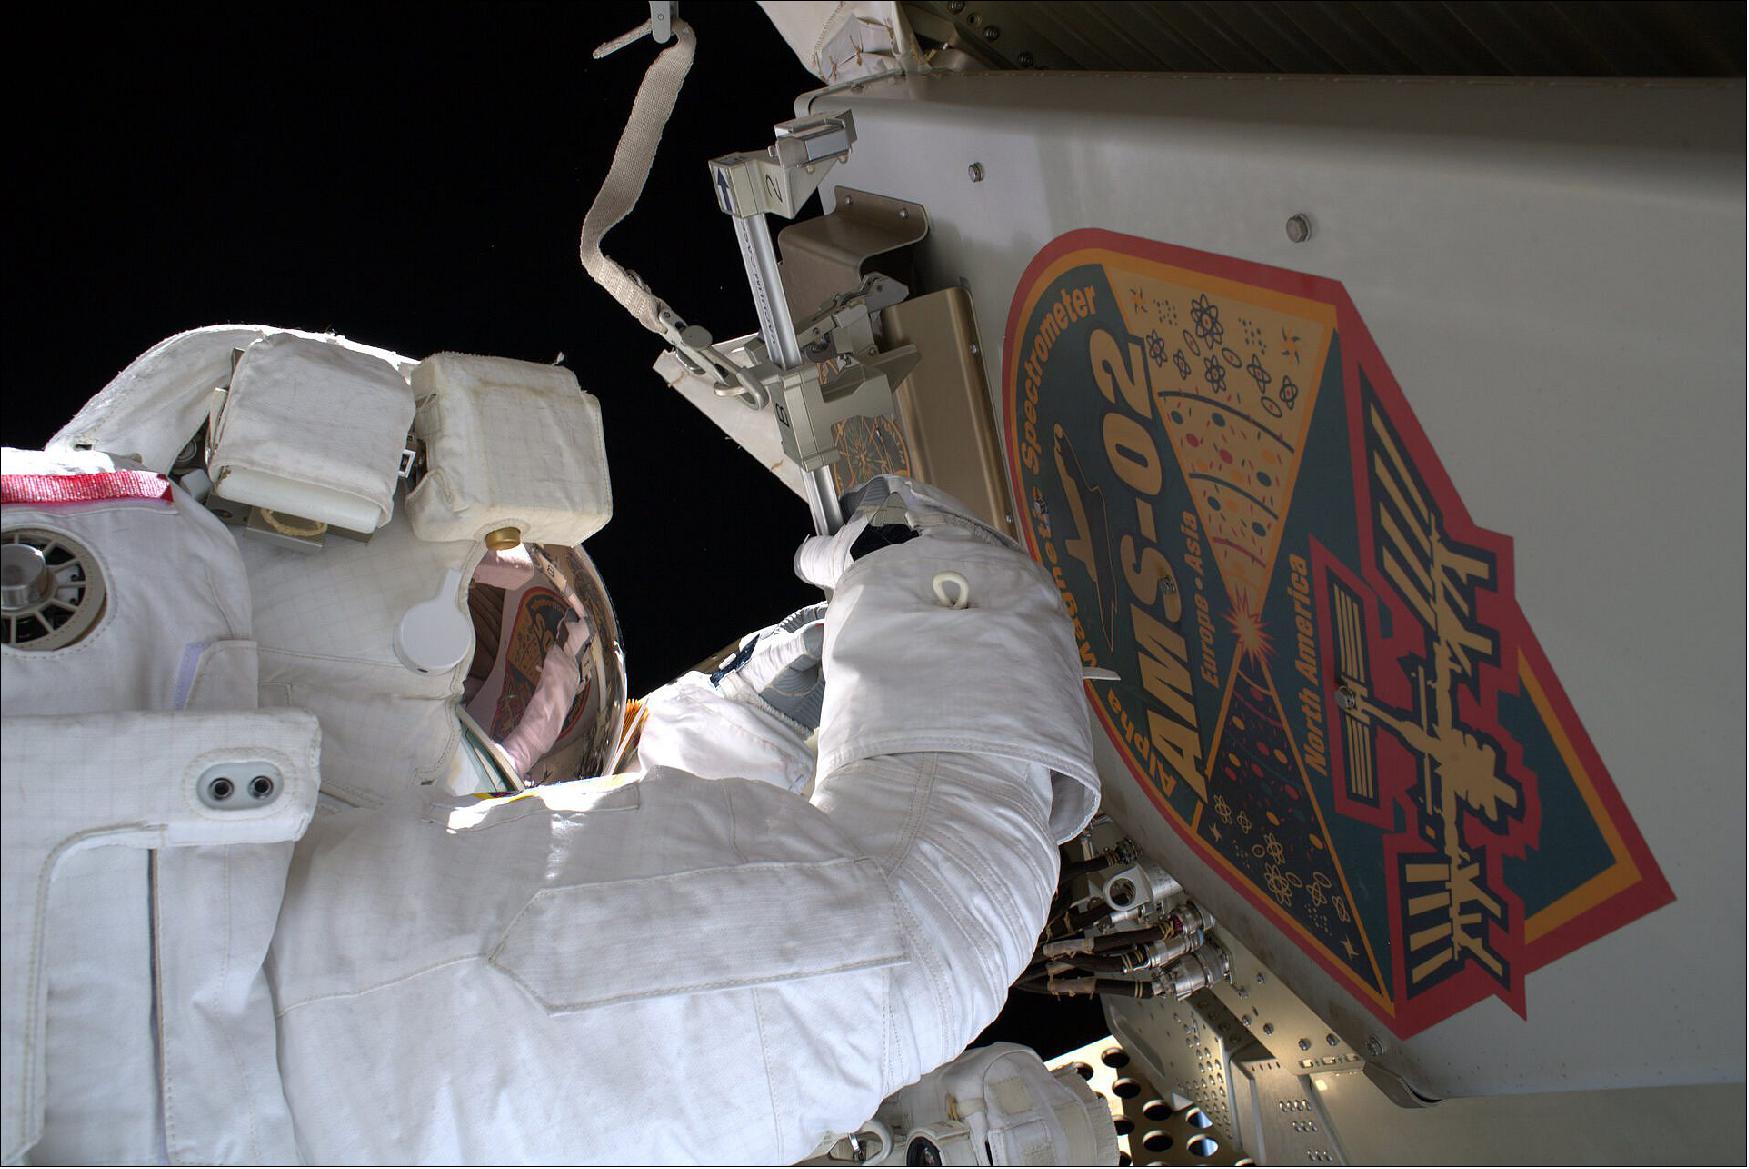 Figure 4: In this image, ESA astronaut Luca Parmitano is seen conducting the first task in a series of four complex spacewalks carried out to maintain AMS-02’s cooling system during his Beyond mission. After removing this debris shield, Luca handed it to NASA astronaut and fellow spacewalker Andrew Morgan who cast it away to burn up harmlessly in Earth’s atmosphere. The pair, and teams on the ground, then got their first look at the worksite. Over 20 new tools were designed for the spacewalks carried out by Luca and Andrew. Though the instrument was never designed to be maintained in orbit, their work extended its lifetime to match that of the Station and will ensure it continues to collect cosmic data to shed light on the origin of our Universe for many years to come (image credit: ESA/NASA)